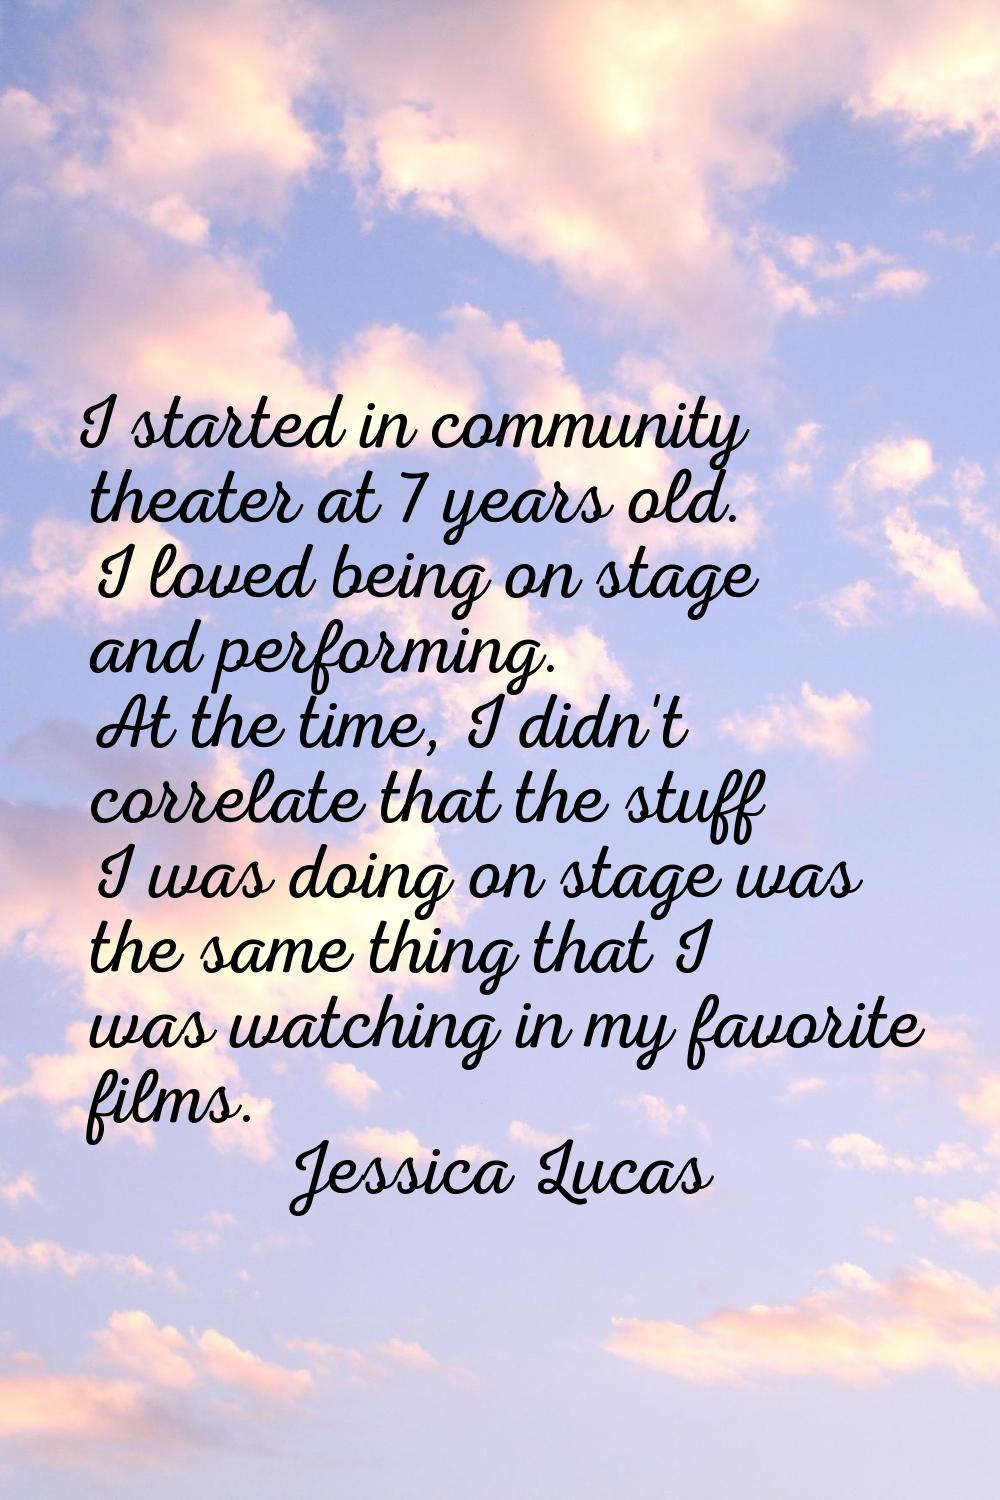 I started in community theater at 7 years old. I loved being on stage and performing. At the time, 